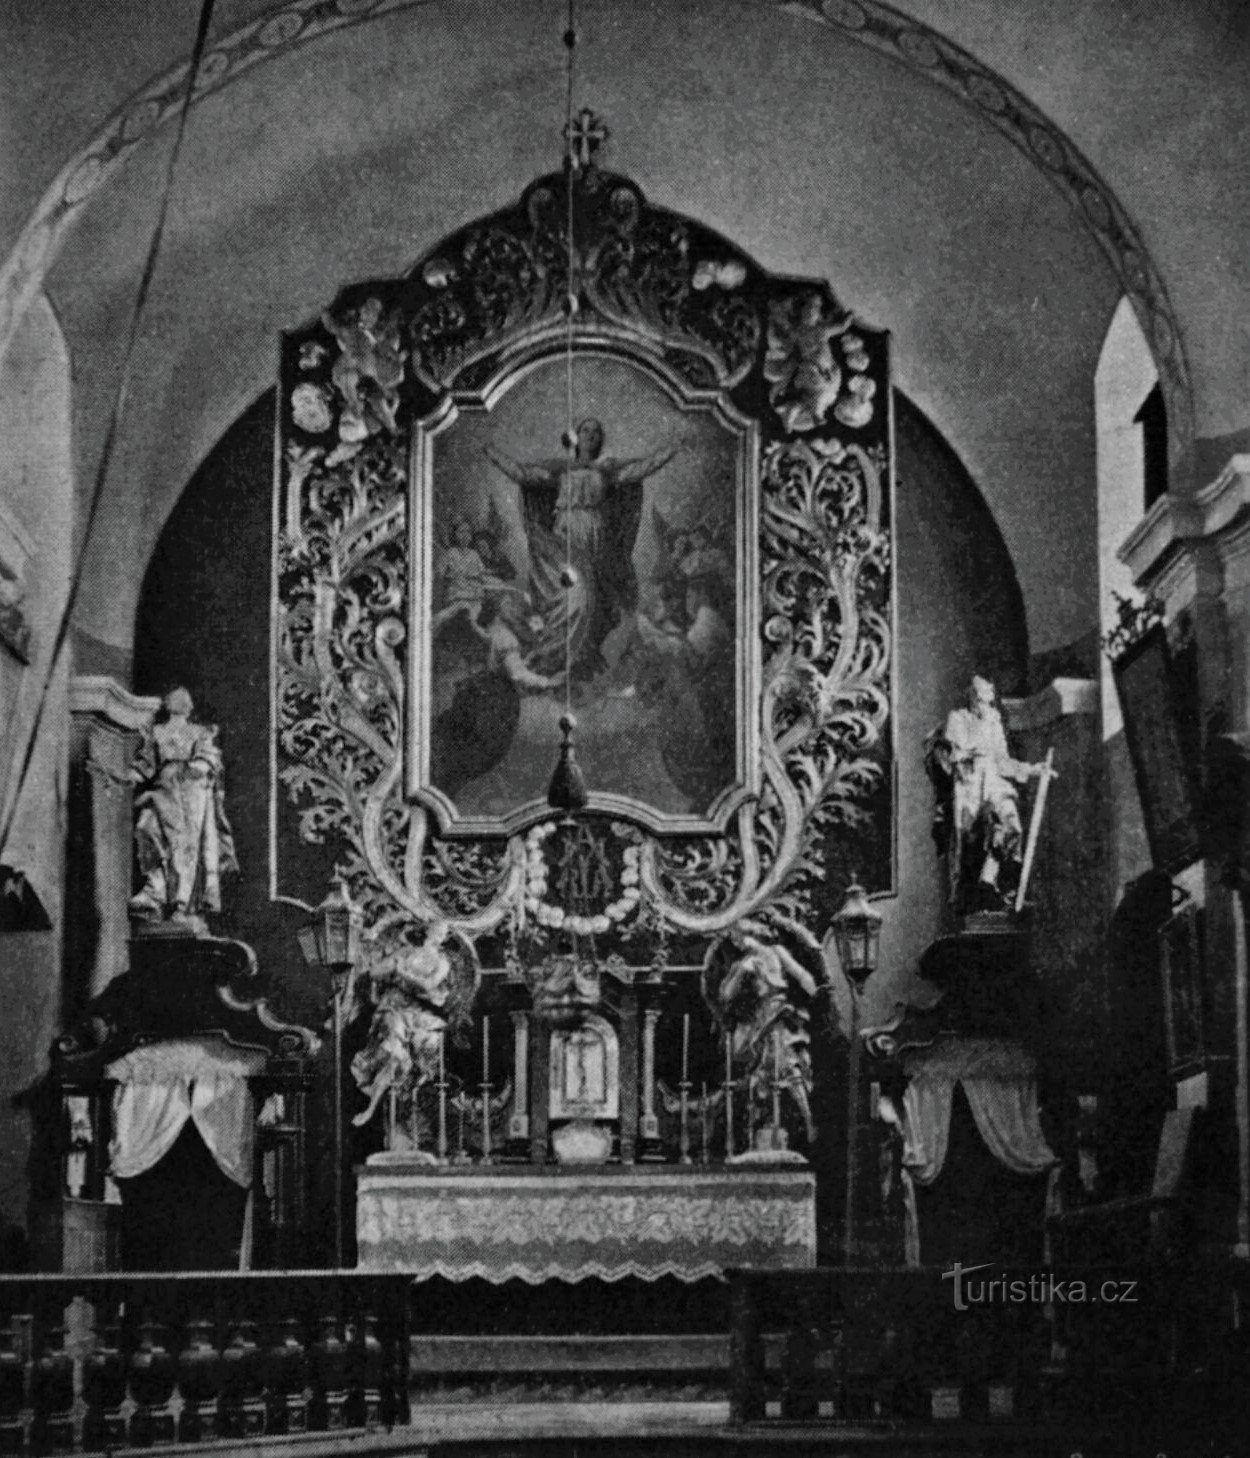 The main altar in the Church of the Assumption of the Virgin Mary in Petrovice before 1904